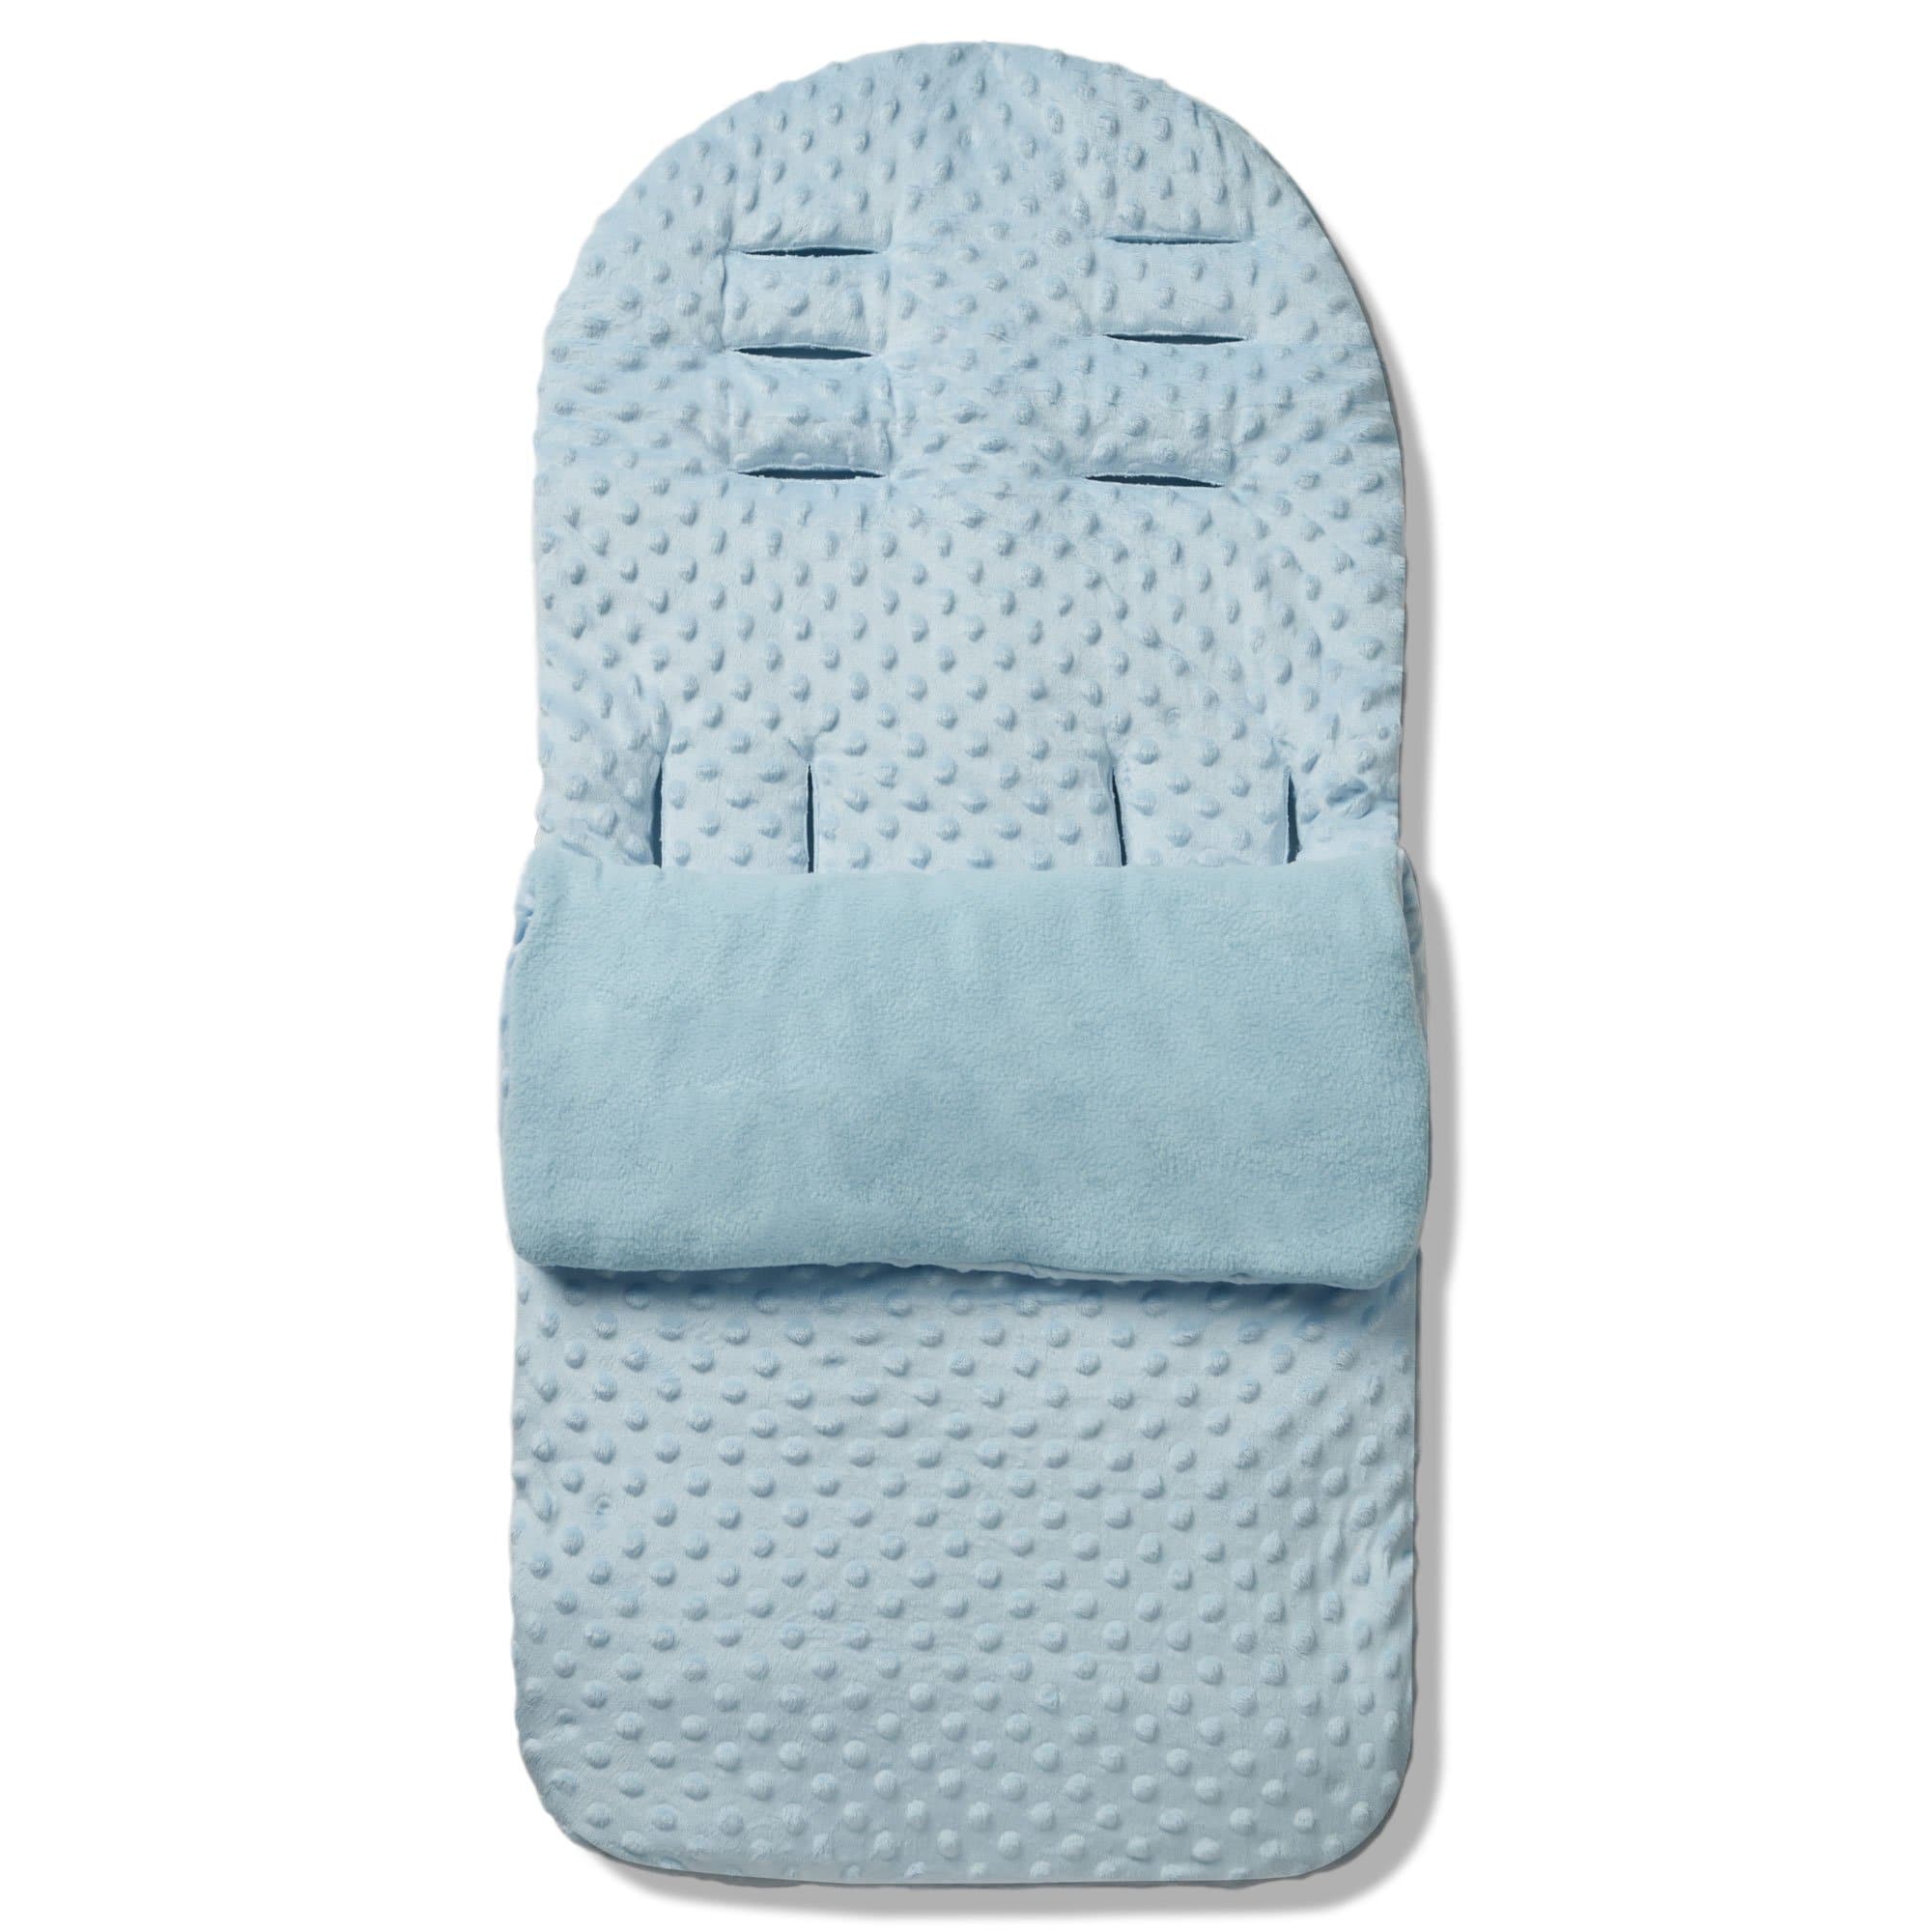 Dimple Footmuff / Cosy Toes Compatible with Esprit - Blue / Fits All Models | For Your Little One